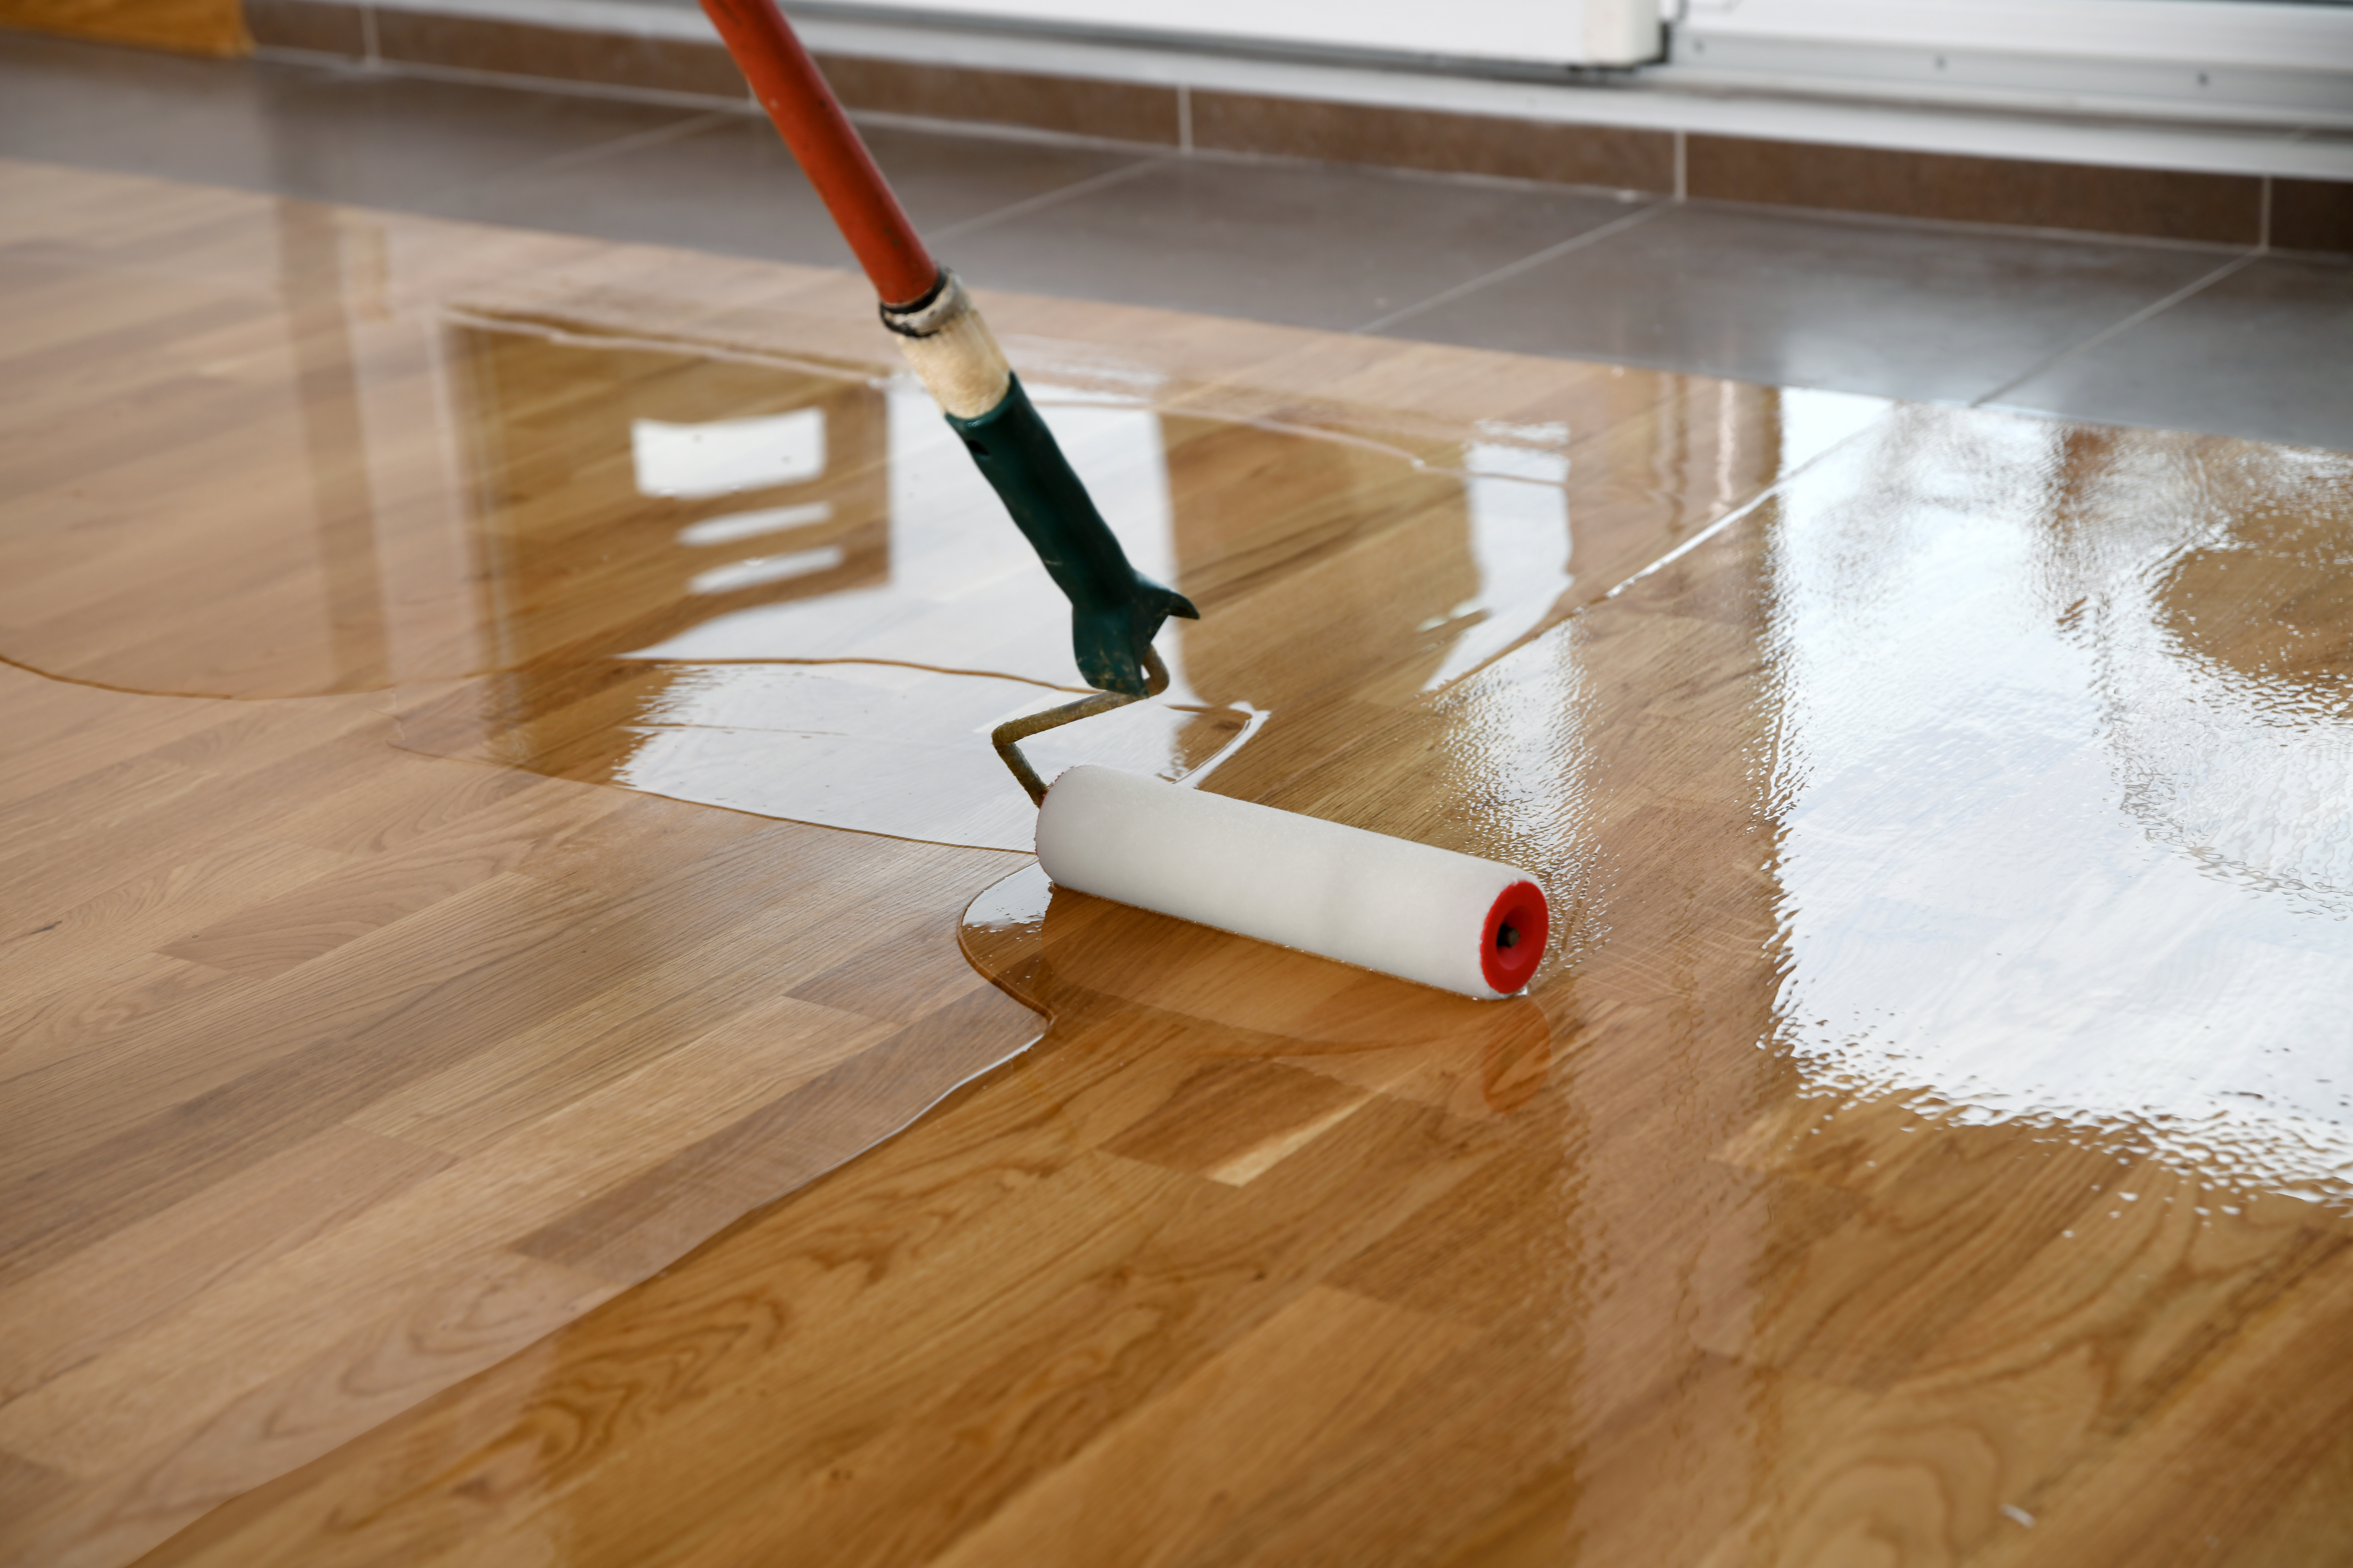 A worker is using a 225mm short pile roller to apply a lacquer coating to wooden floors.